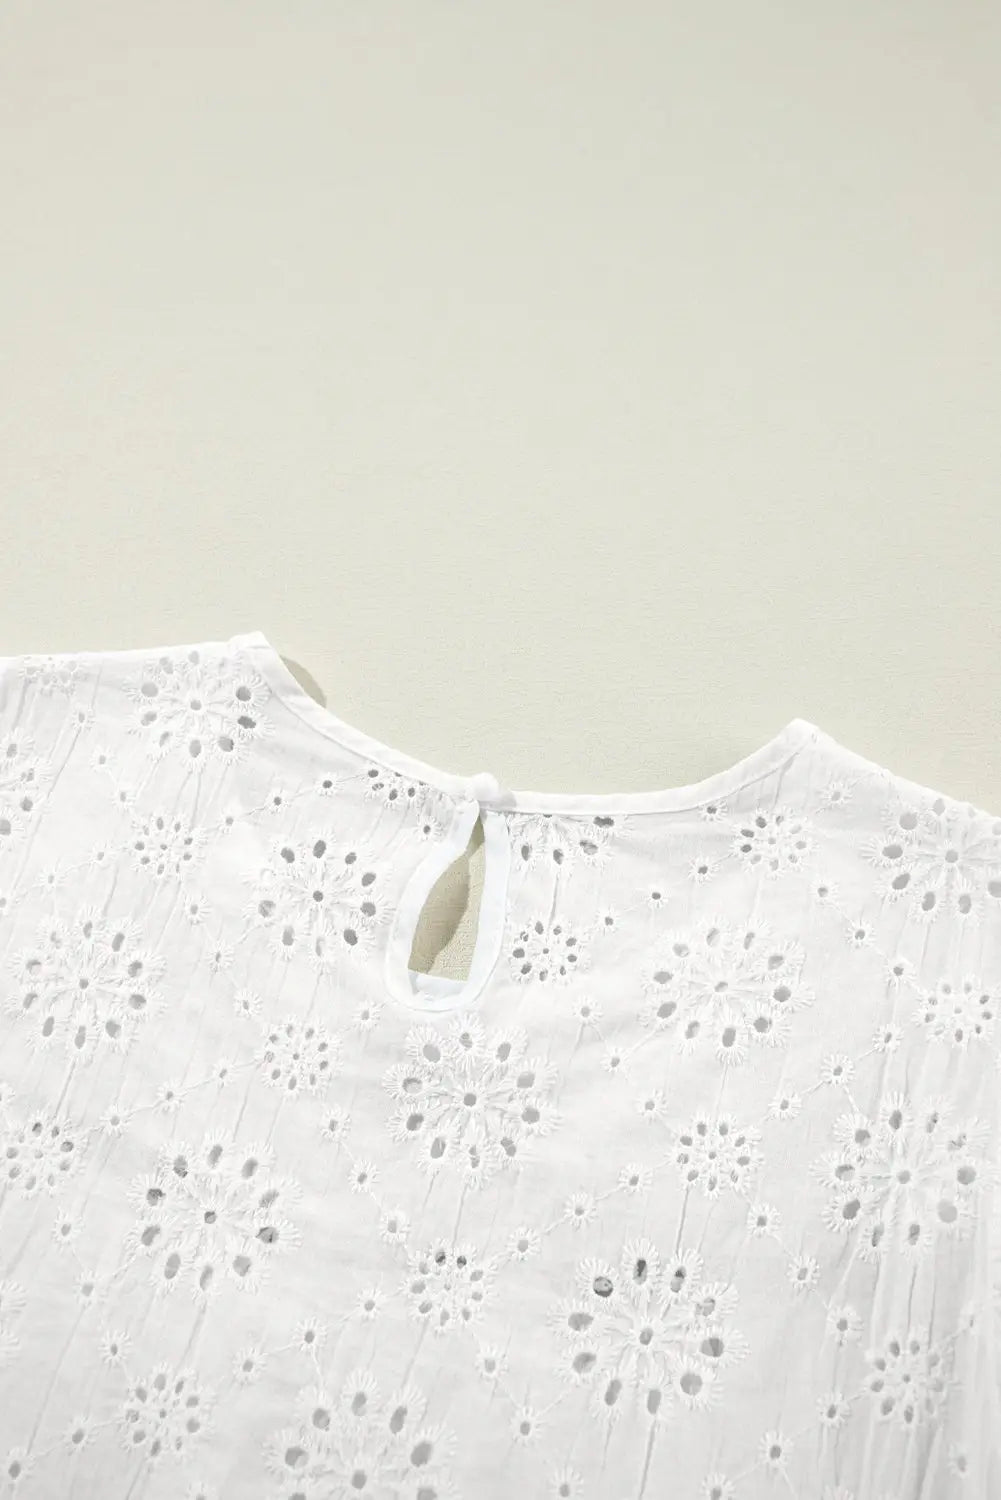 White eyelet embroidered flutter sleeve blouse - tops/blouses & shirts